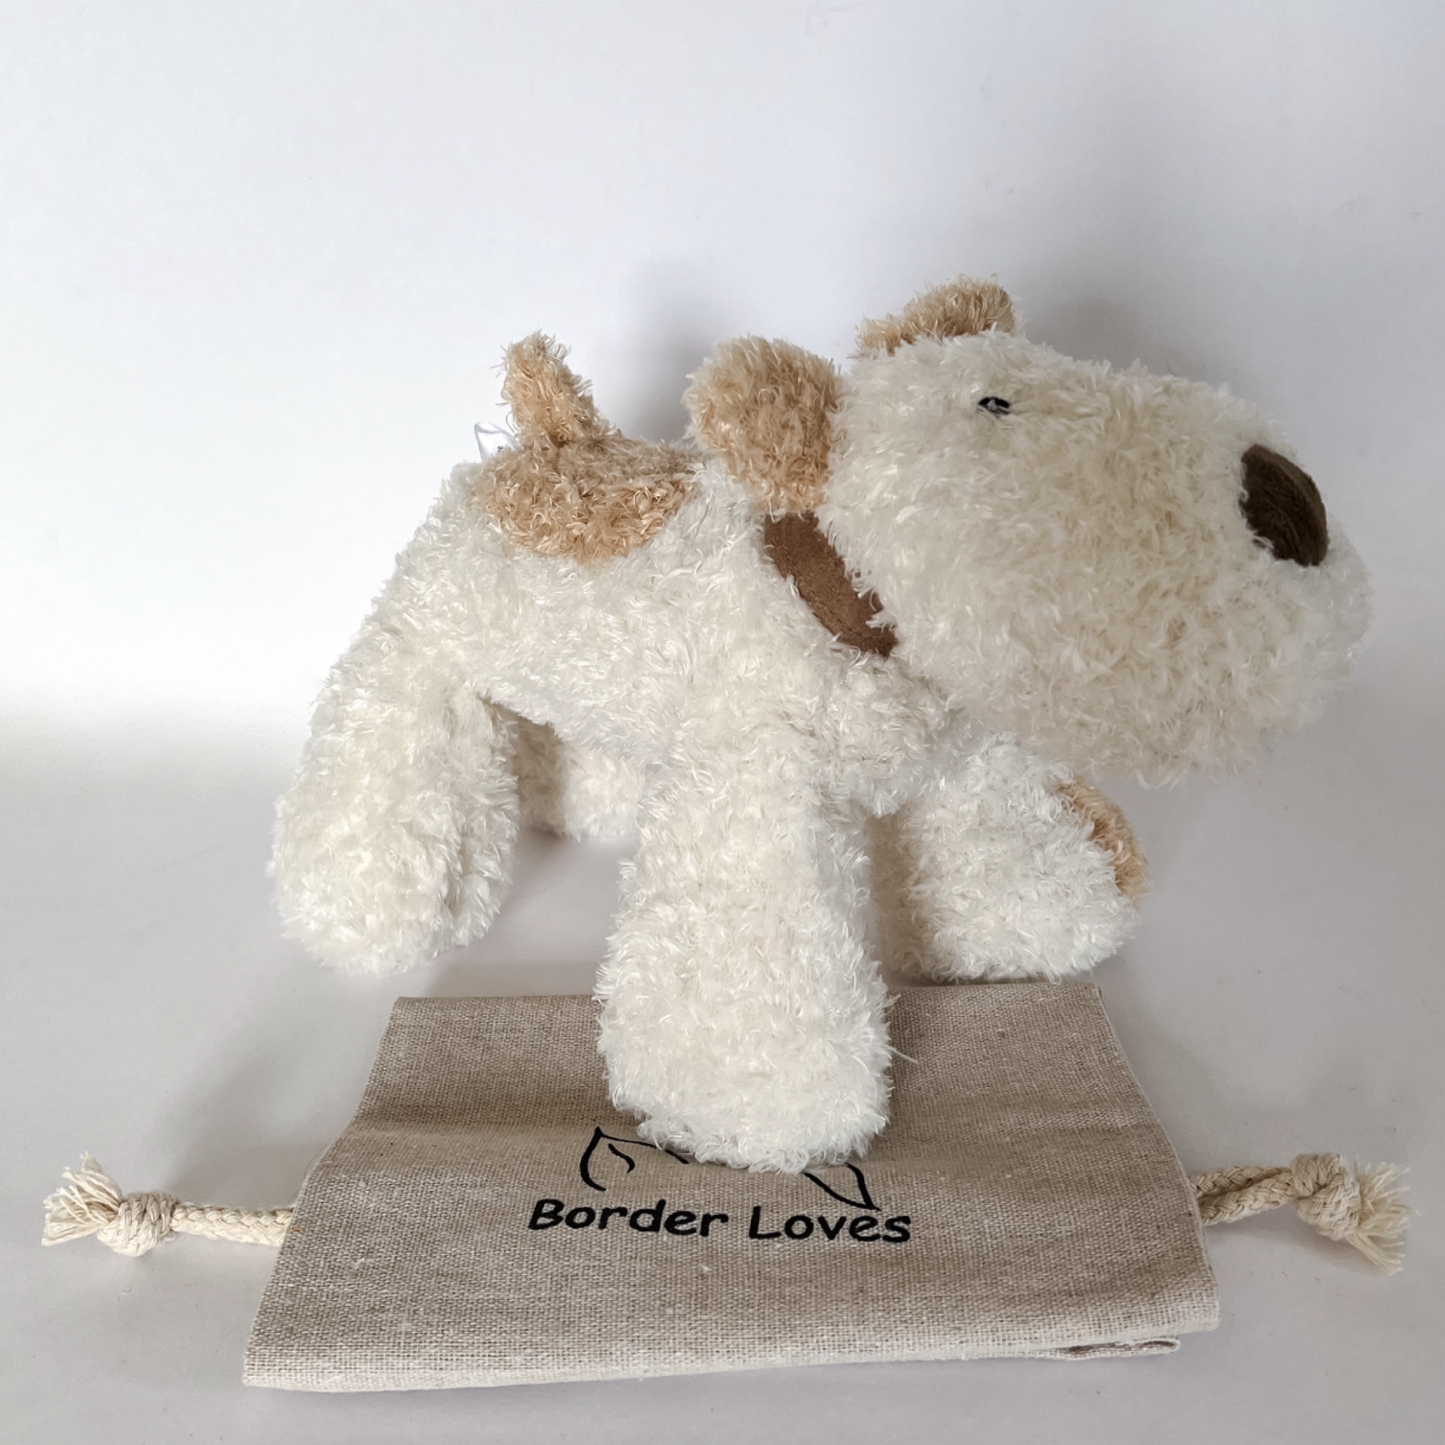 Airedale terrier dog dog toy by Border Loves